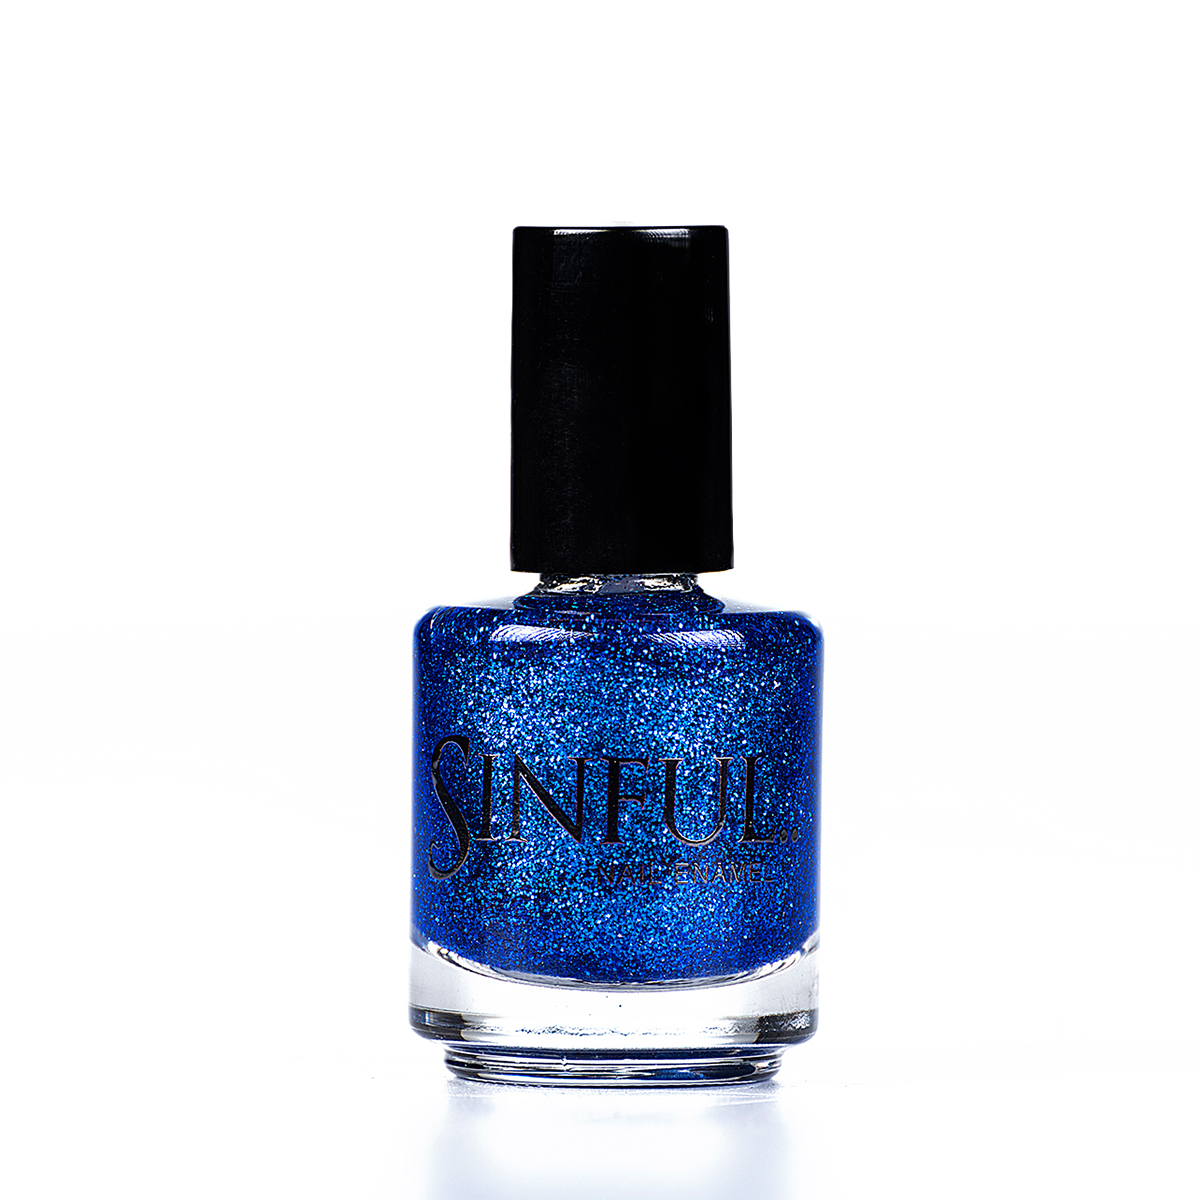 Sapphire blue glitter. Sinful always recommends applying two coats of polish to give a solid colour, then applying top coat to extend the wear-time of the polish. 15ml